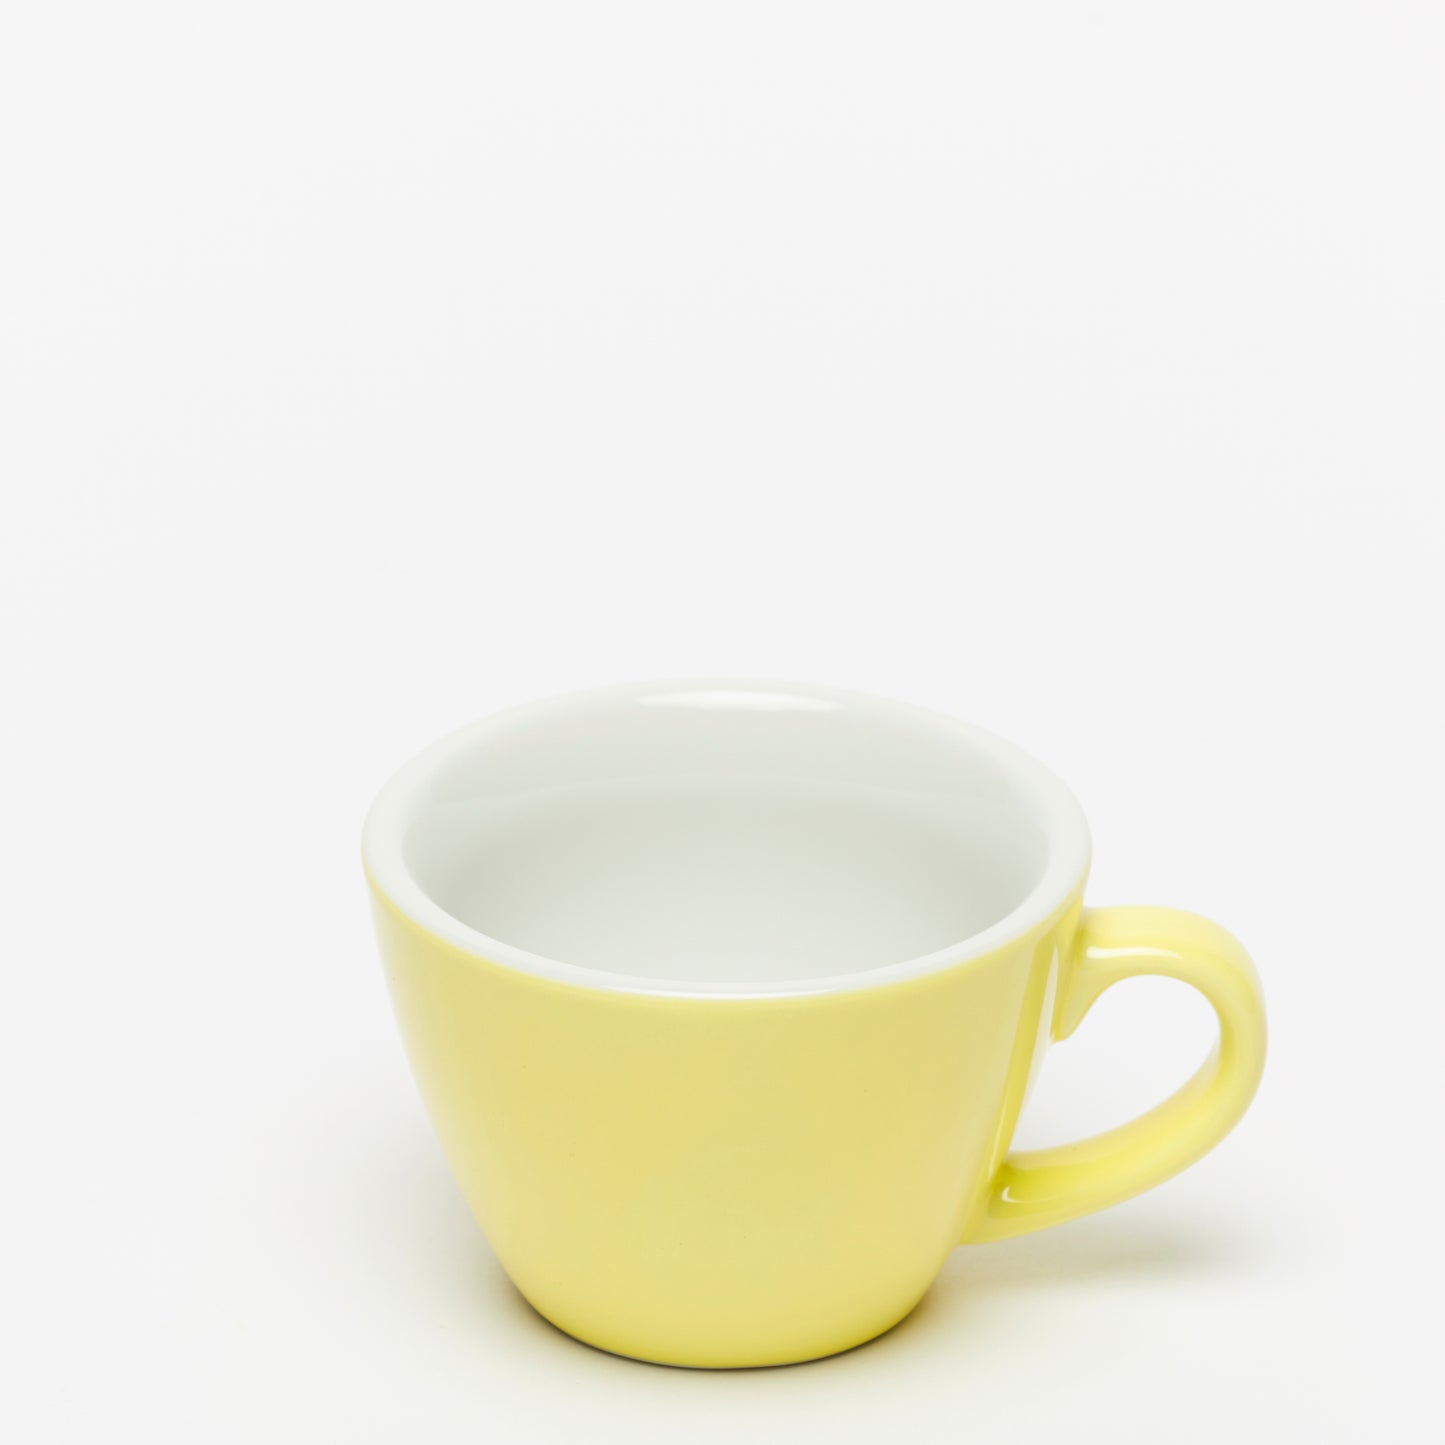 ACME Yellow Flat White Cup & Saucer Set (150ml)